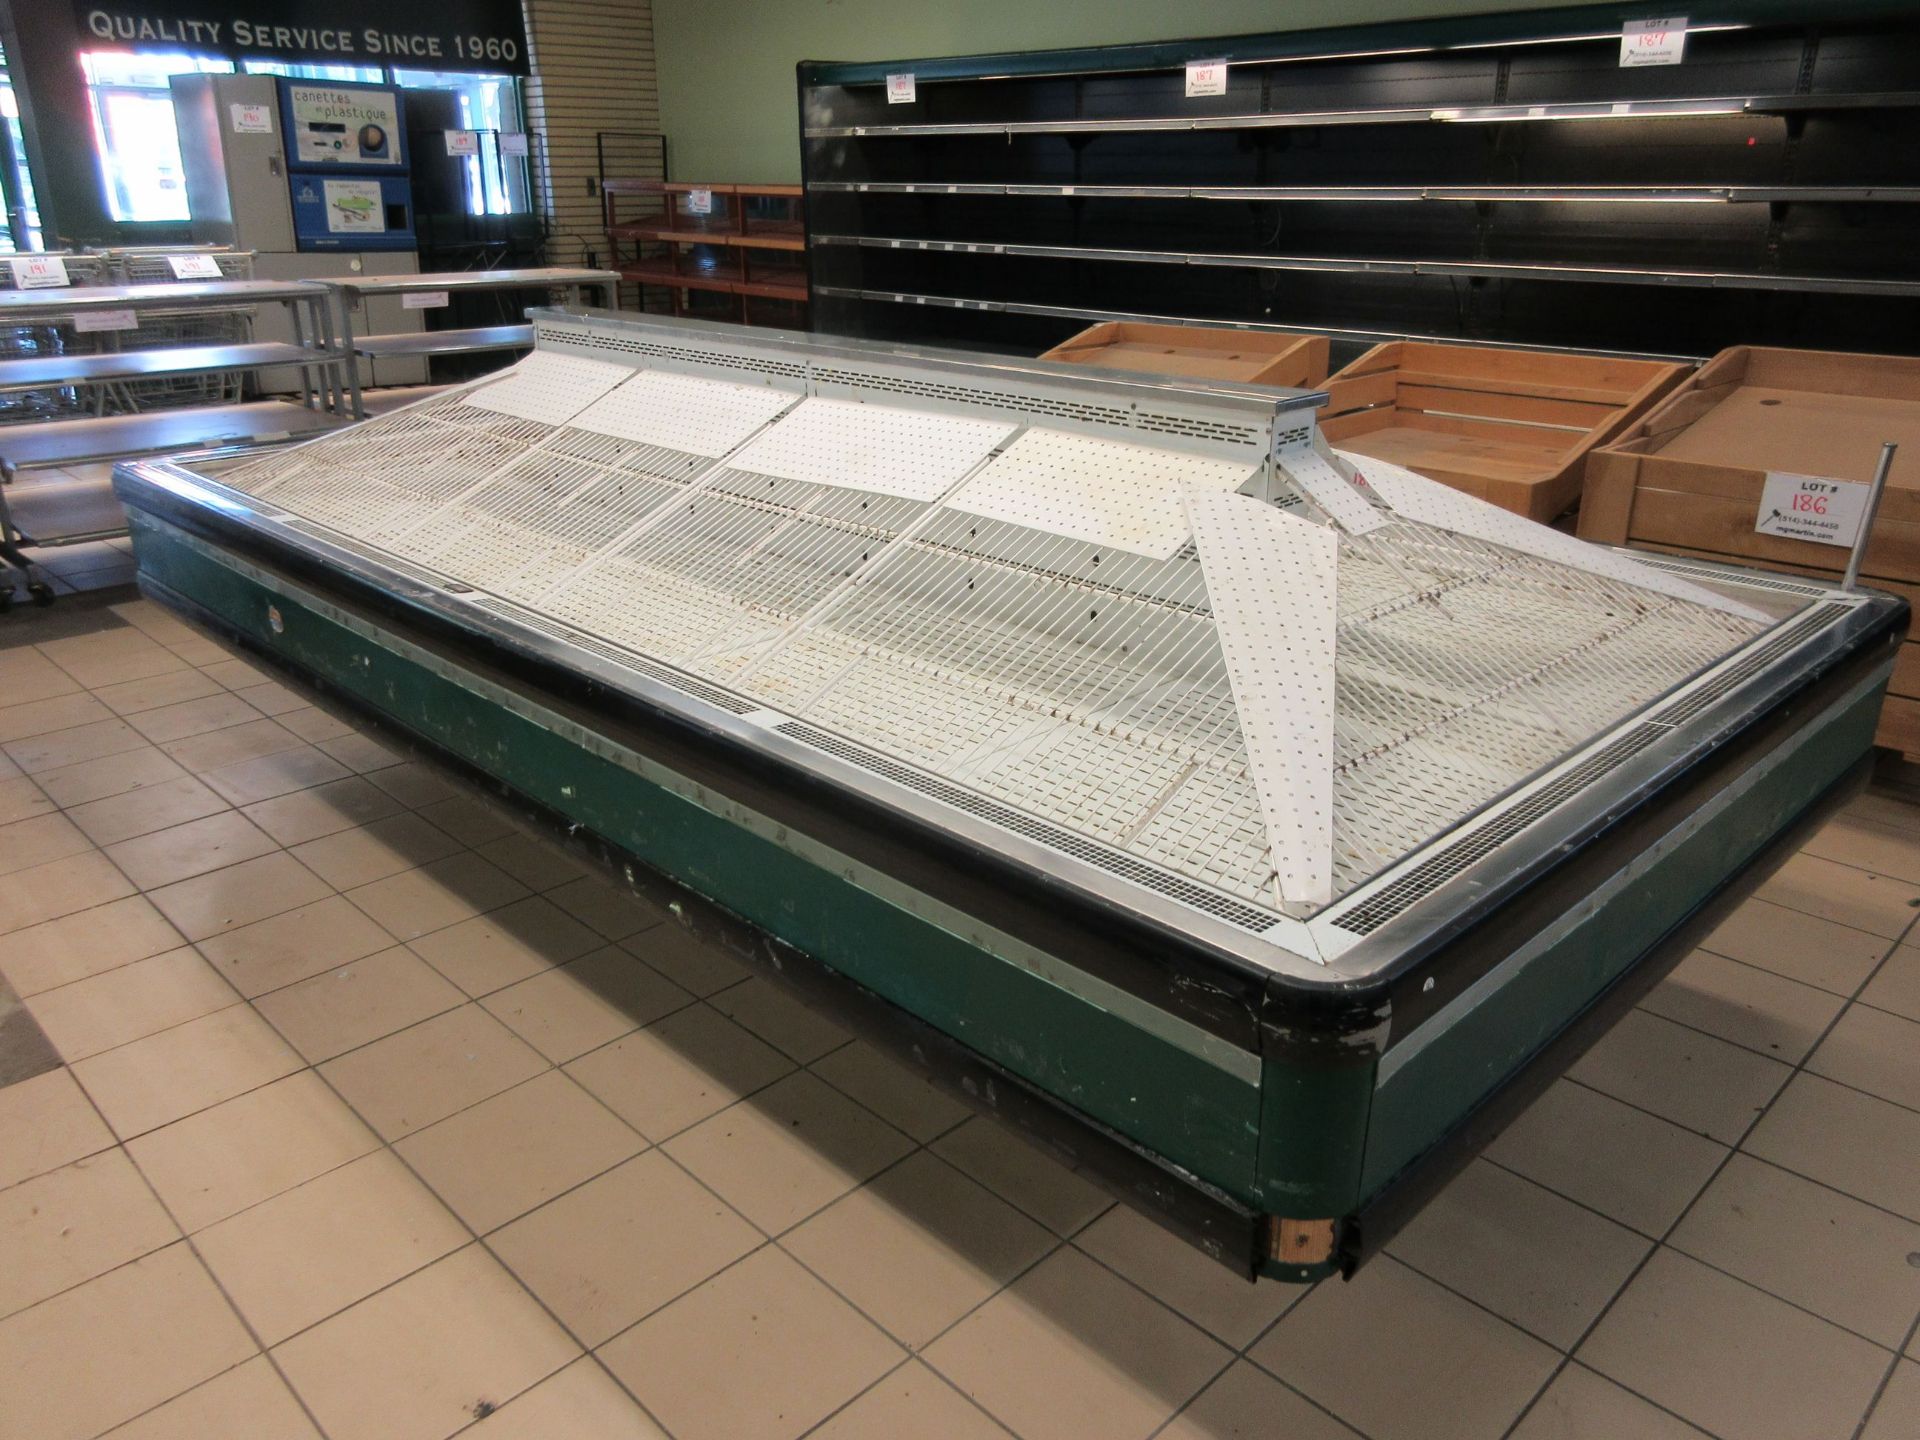 ARNEG open refrigerated unit (without compressor) model: LACOLLE FRUIT 12', aprox. 140 1/2"w x 72